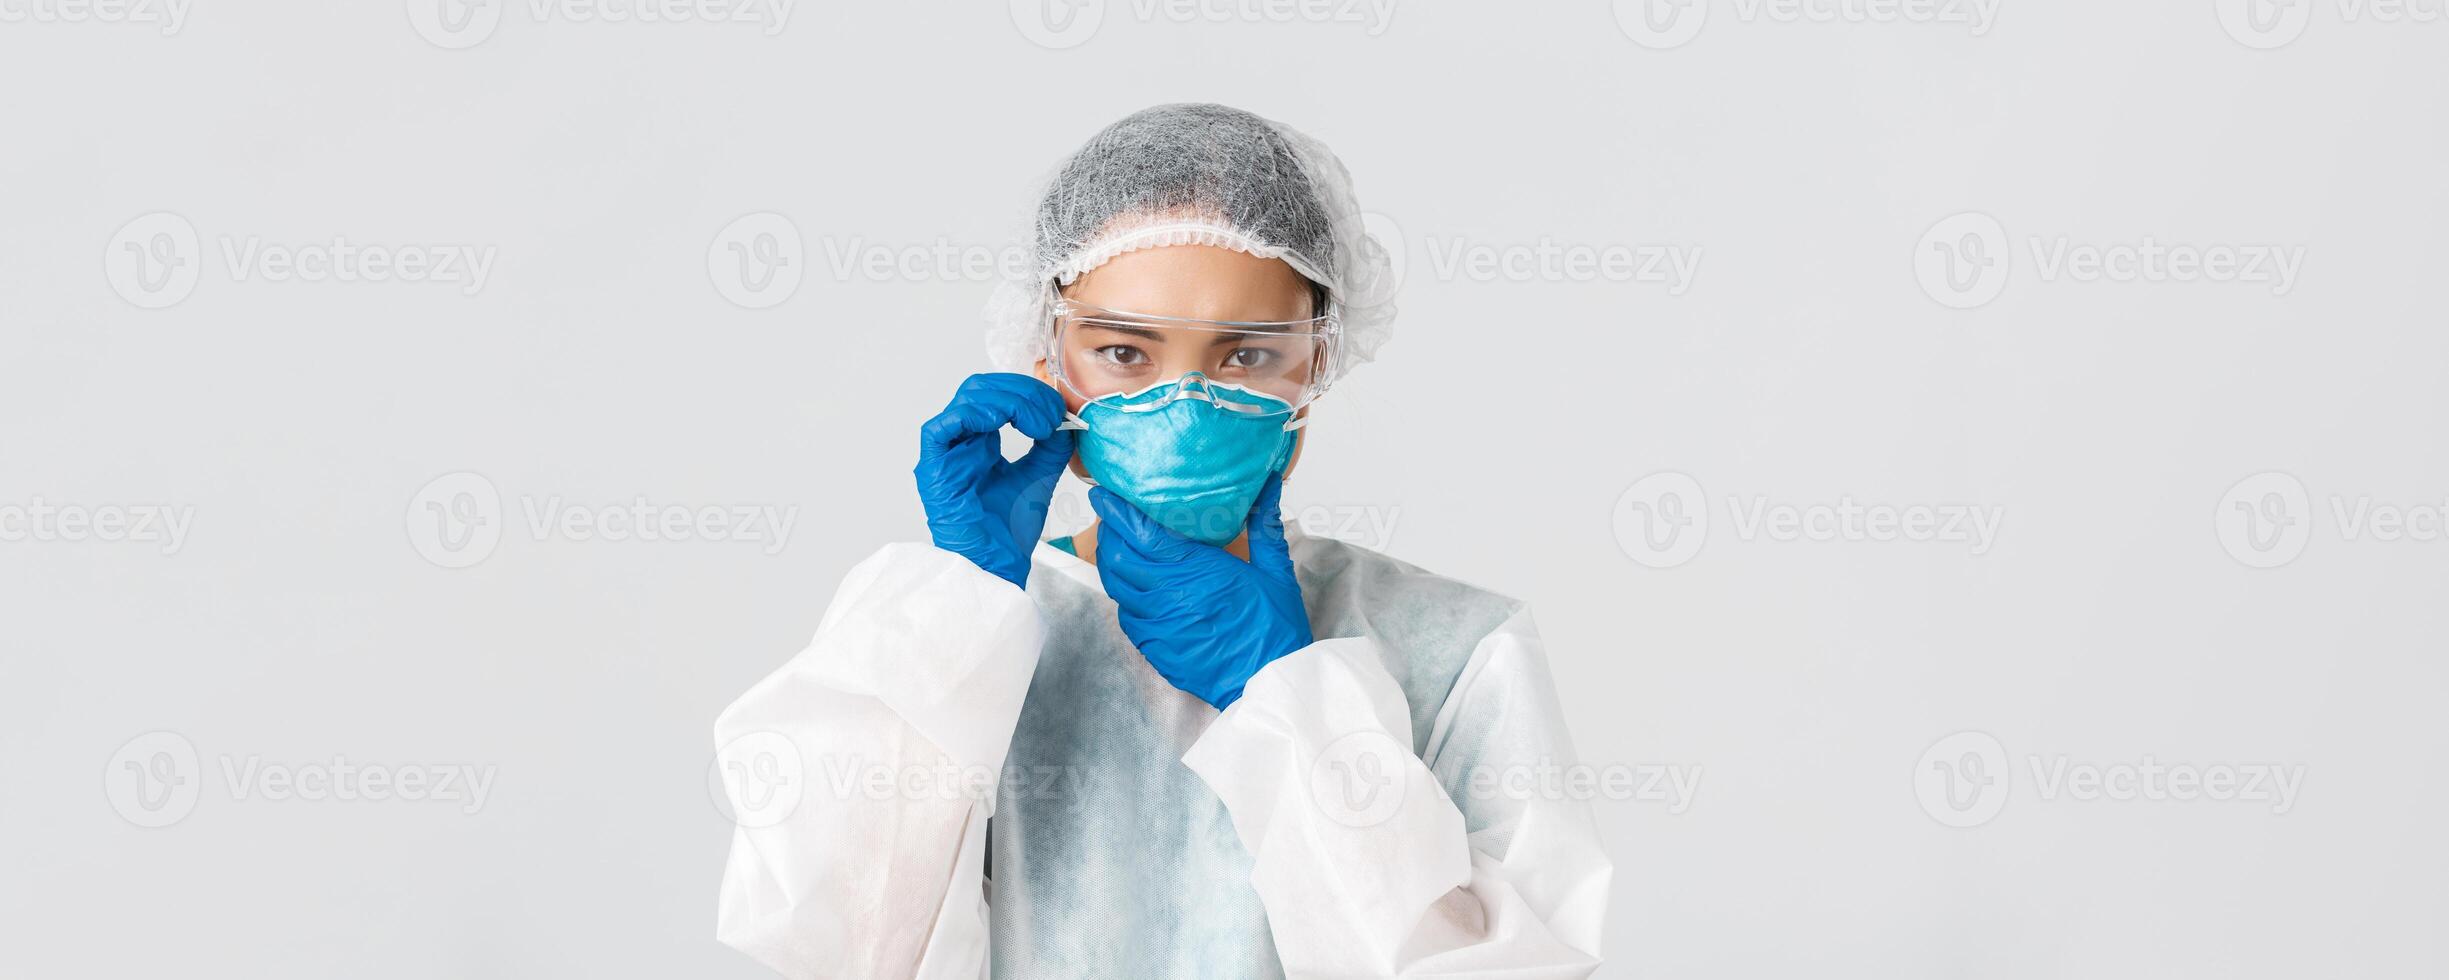 Covid-19, coronavirus disease, healthcare workers concept. Serious asian female doctor prepare enter contagious zone, examine sick patients, put on PPE and respirator, white background photo